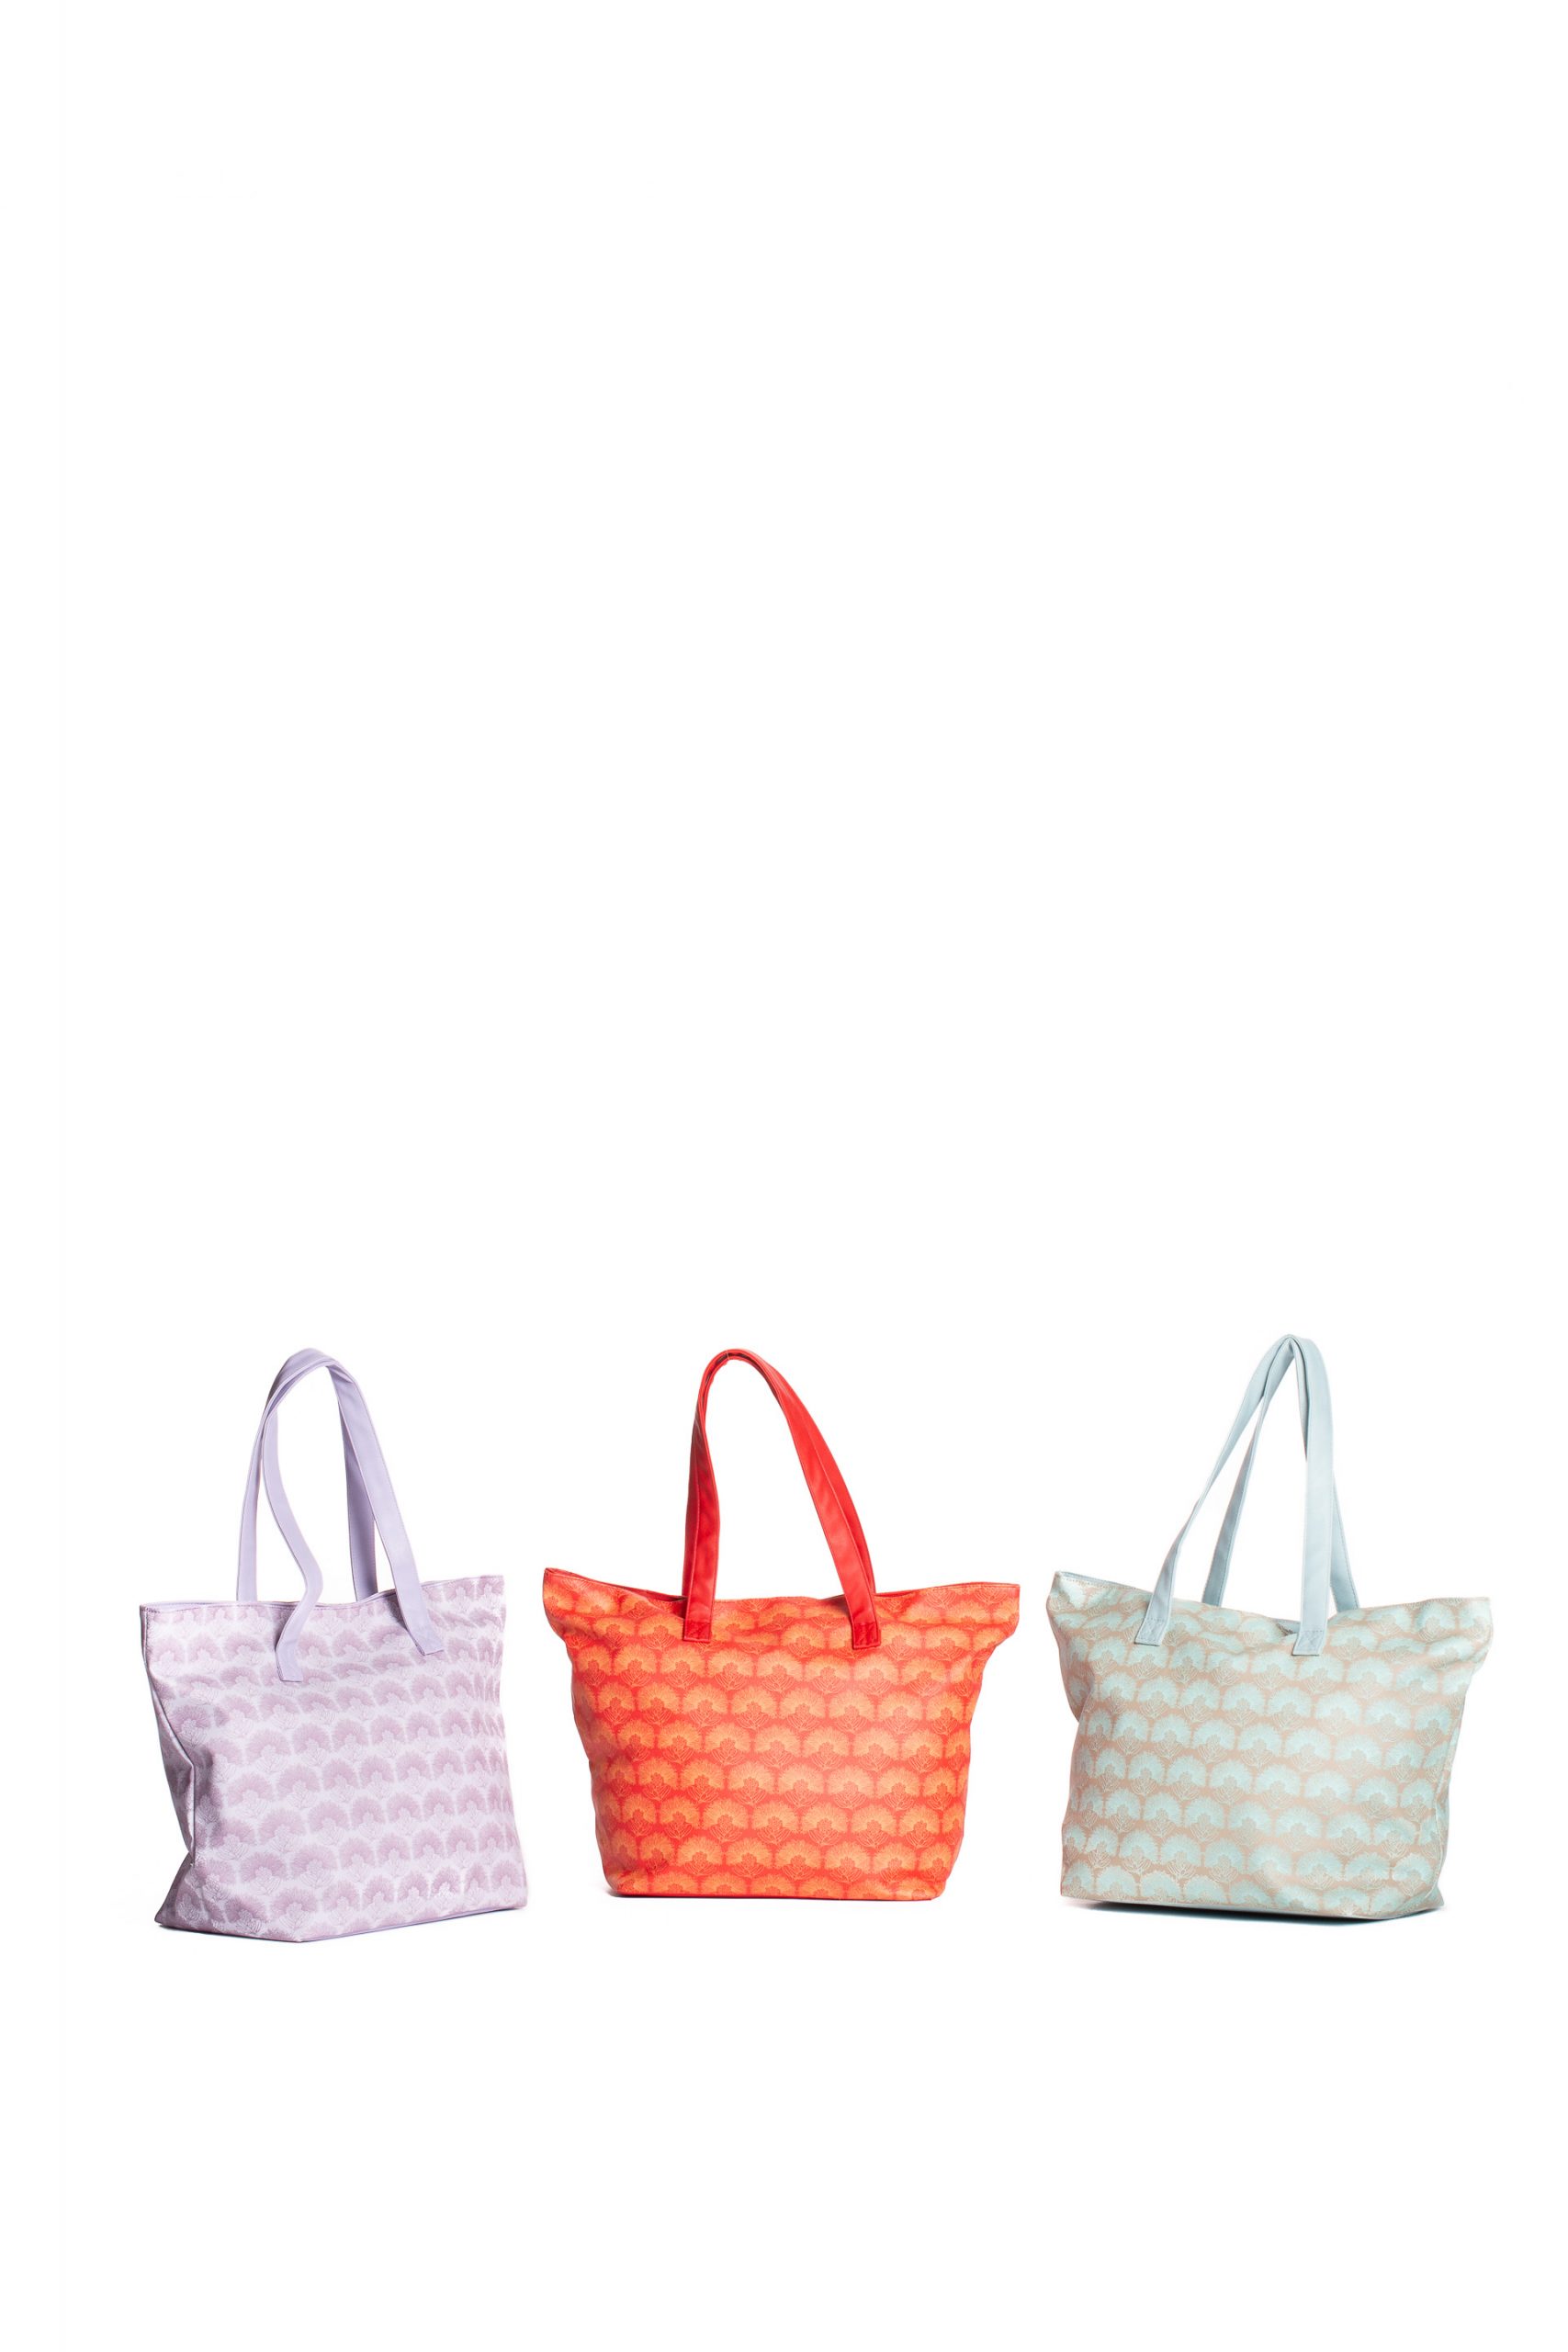 ILima Tote in Purple, Red, and Green